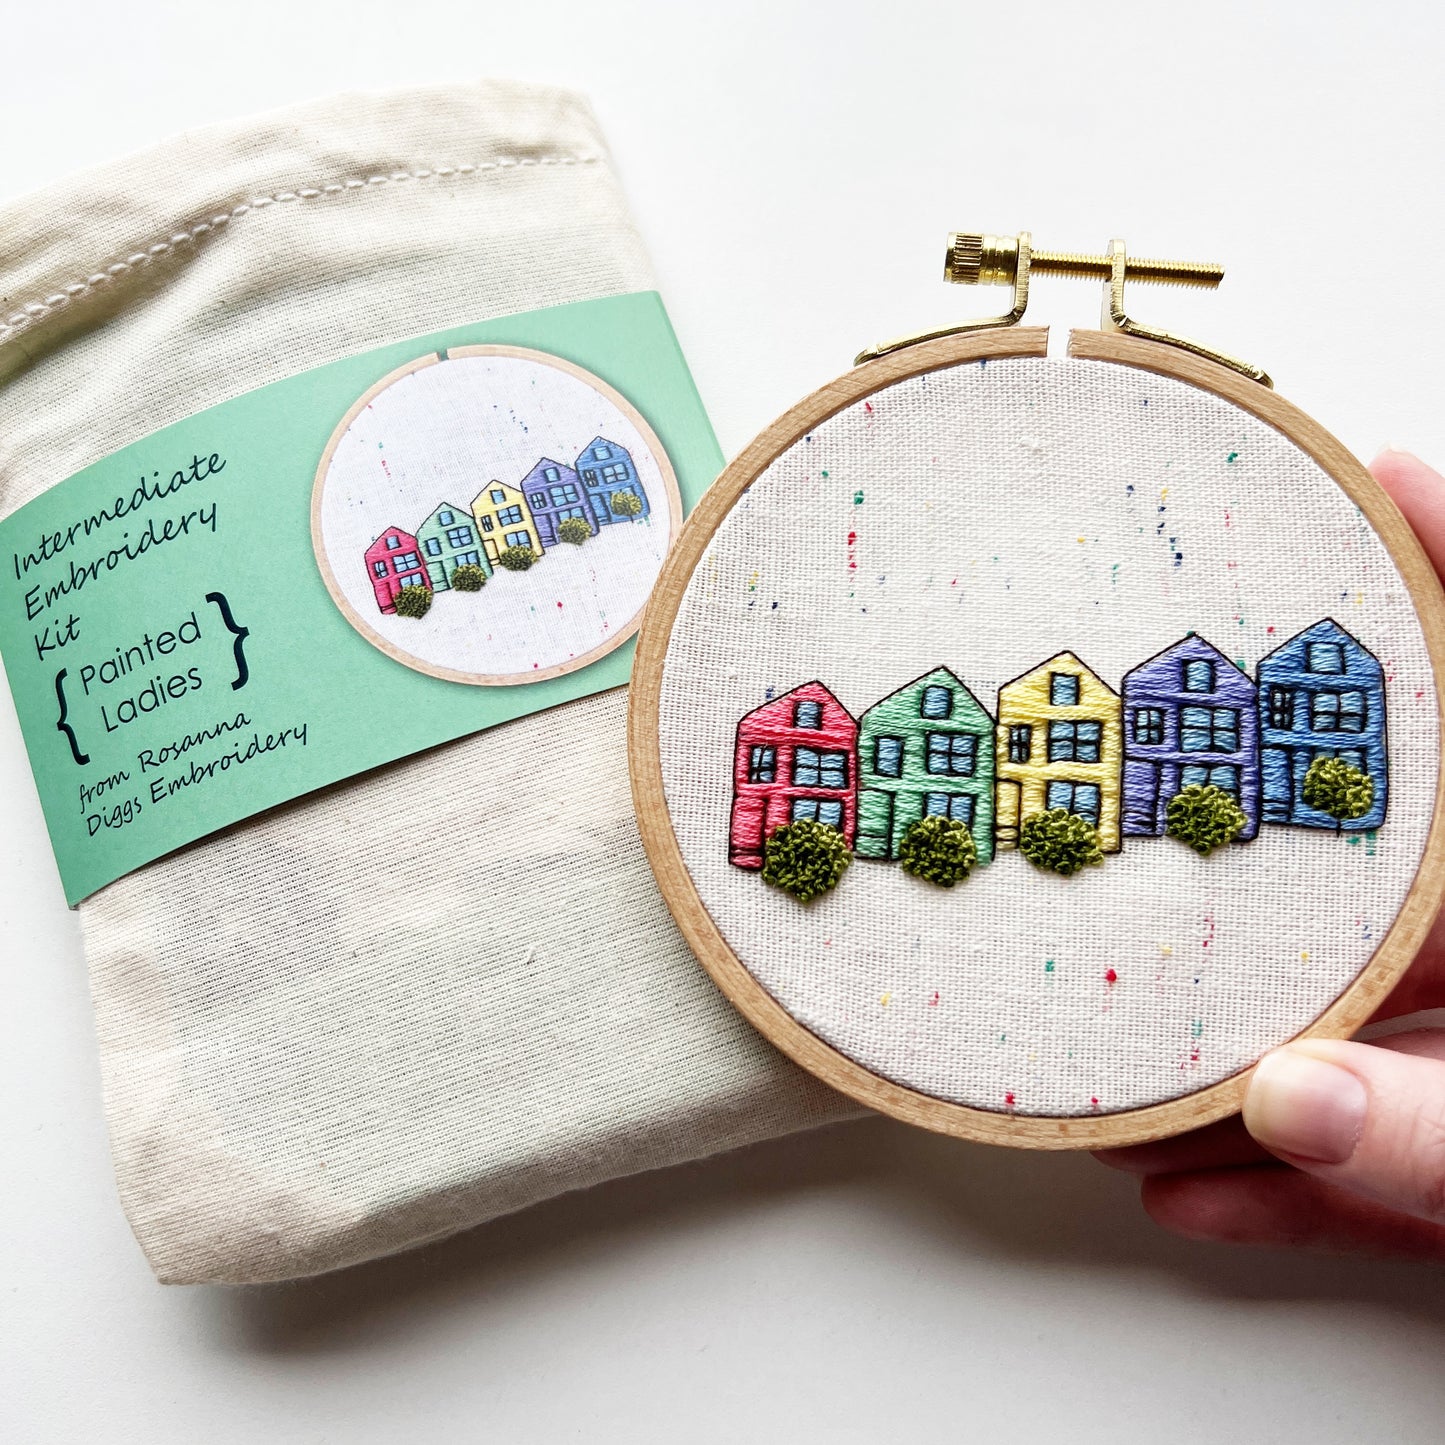 Inspirations Embroidery Kits – a Grand Give-Away! –